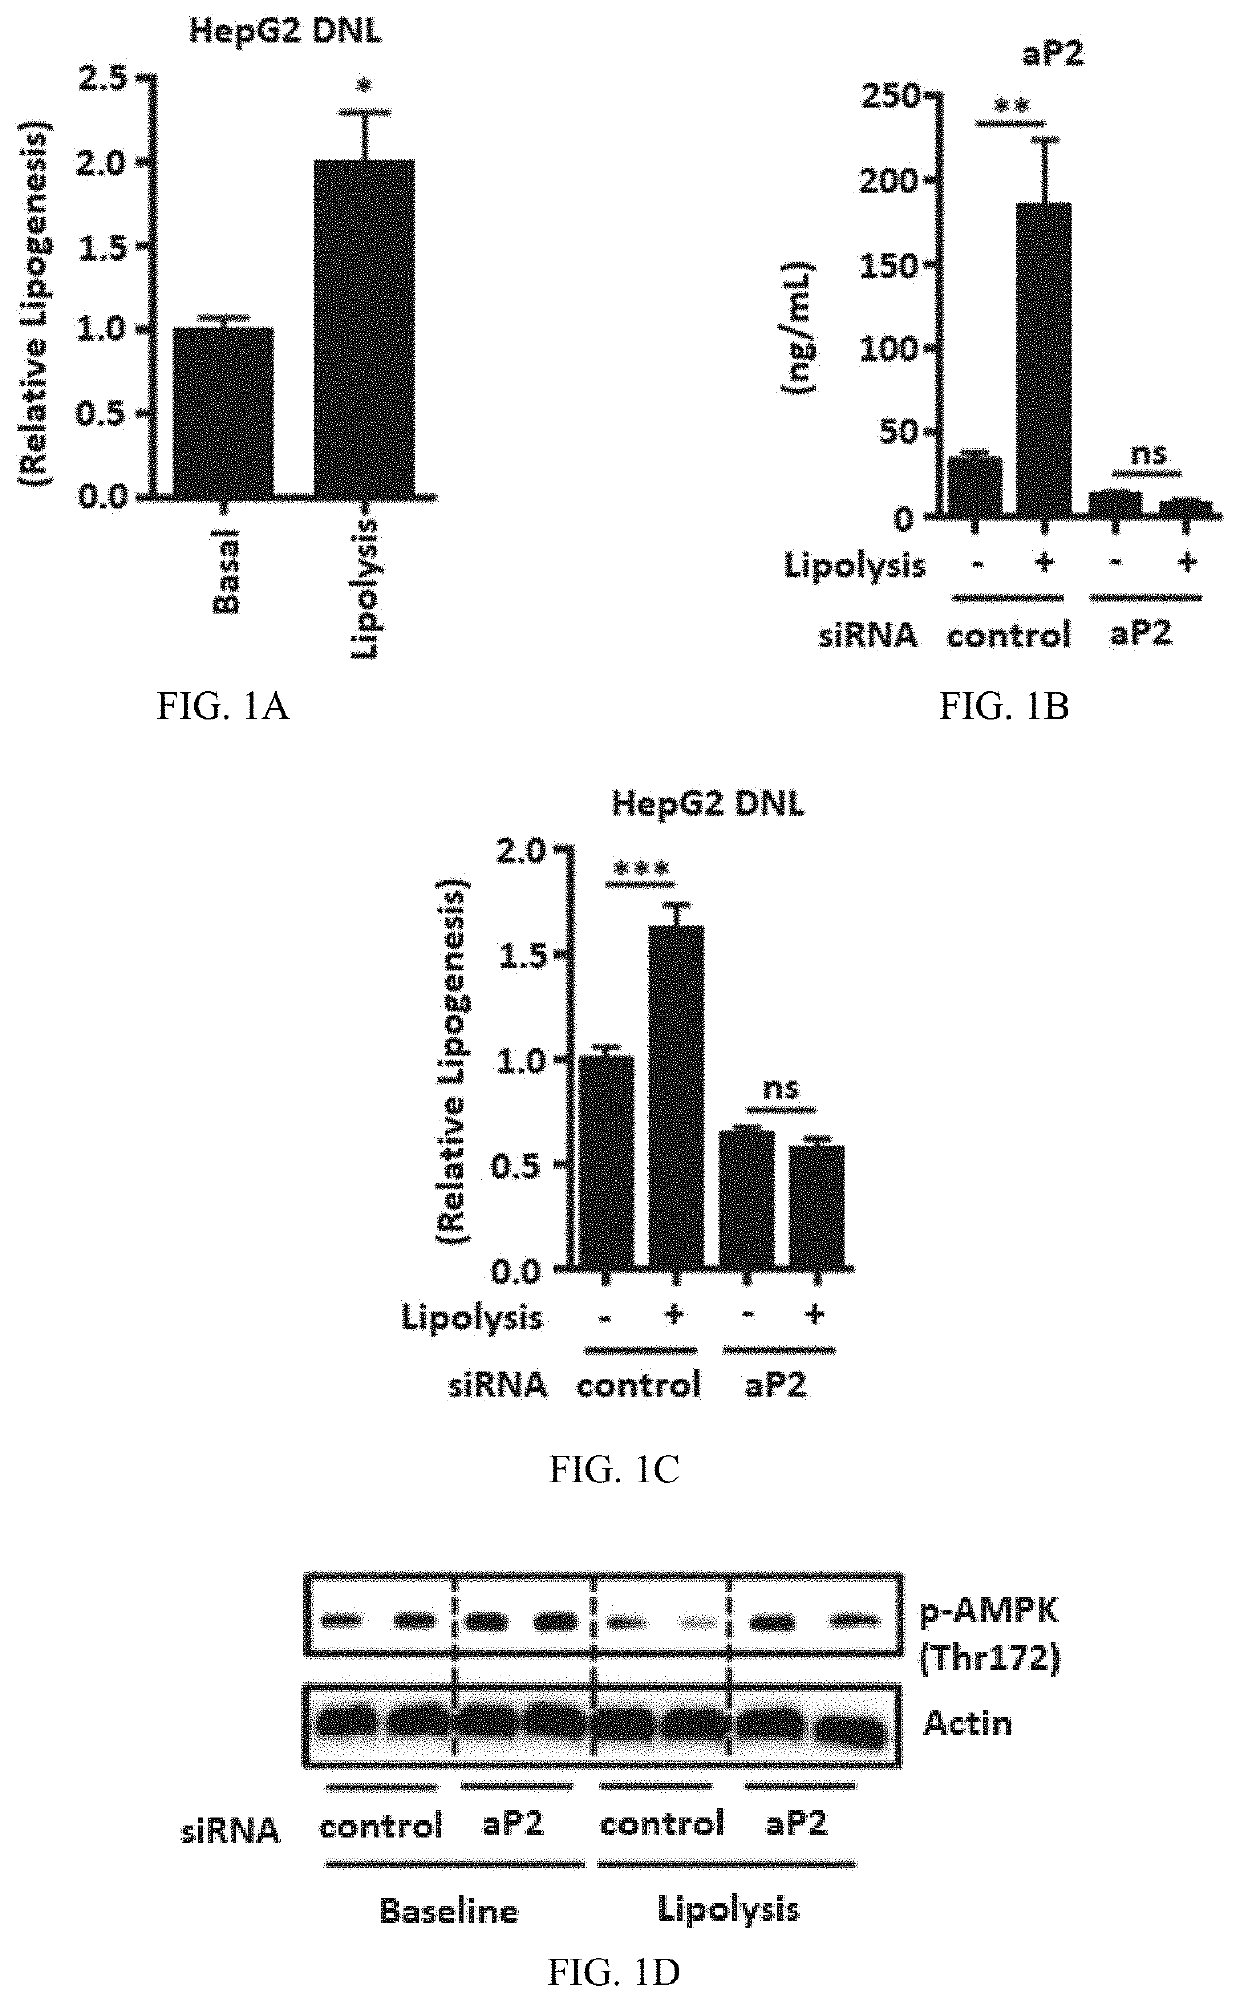 Method to identify compounds useful to treat dysregulated lipogenesis, diabetes, and related disorders